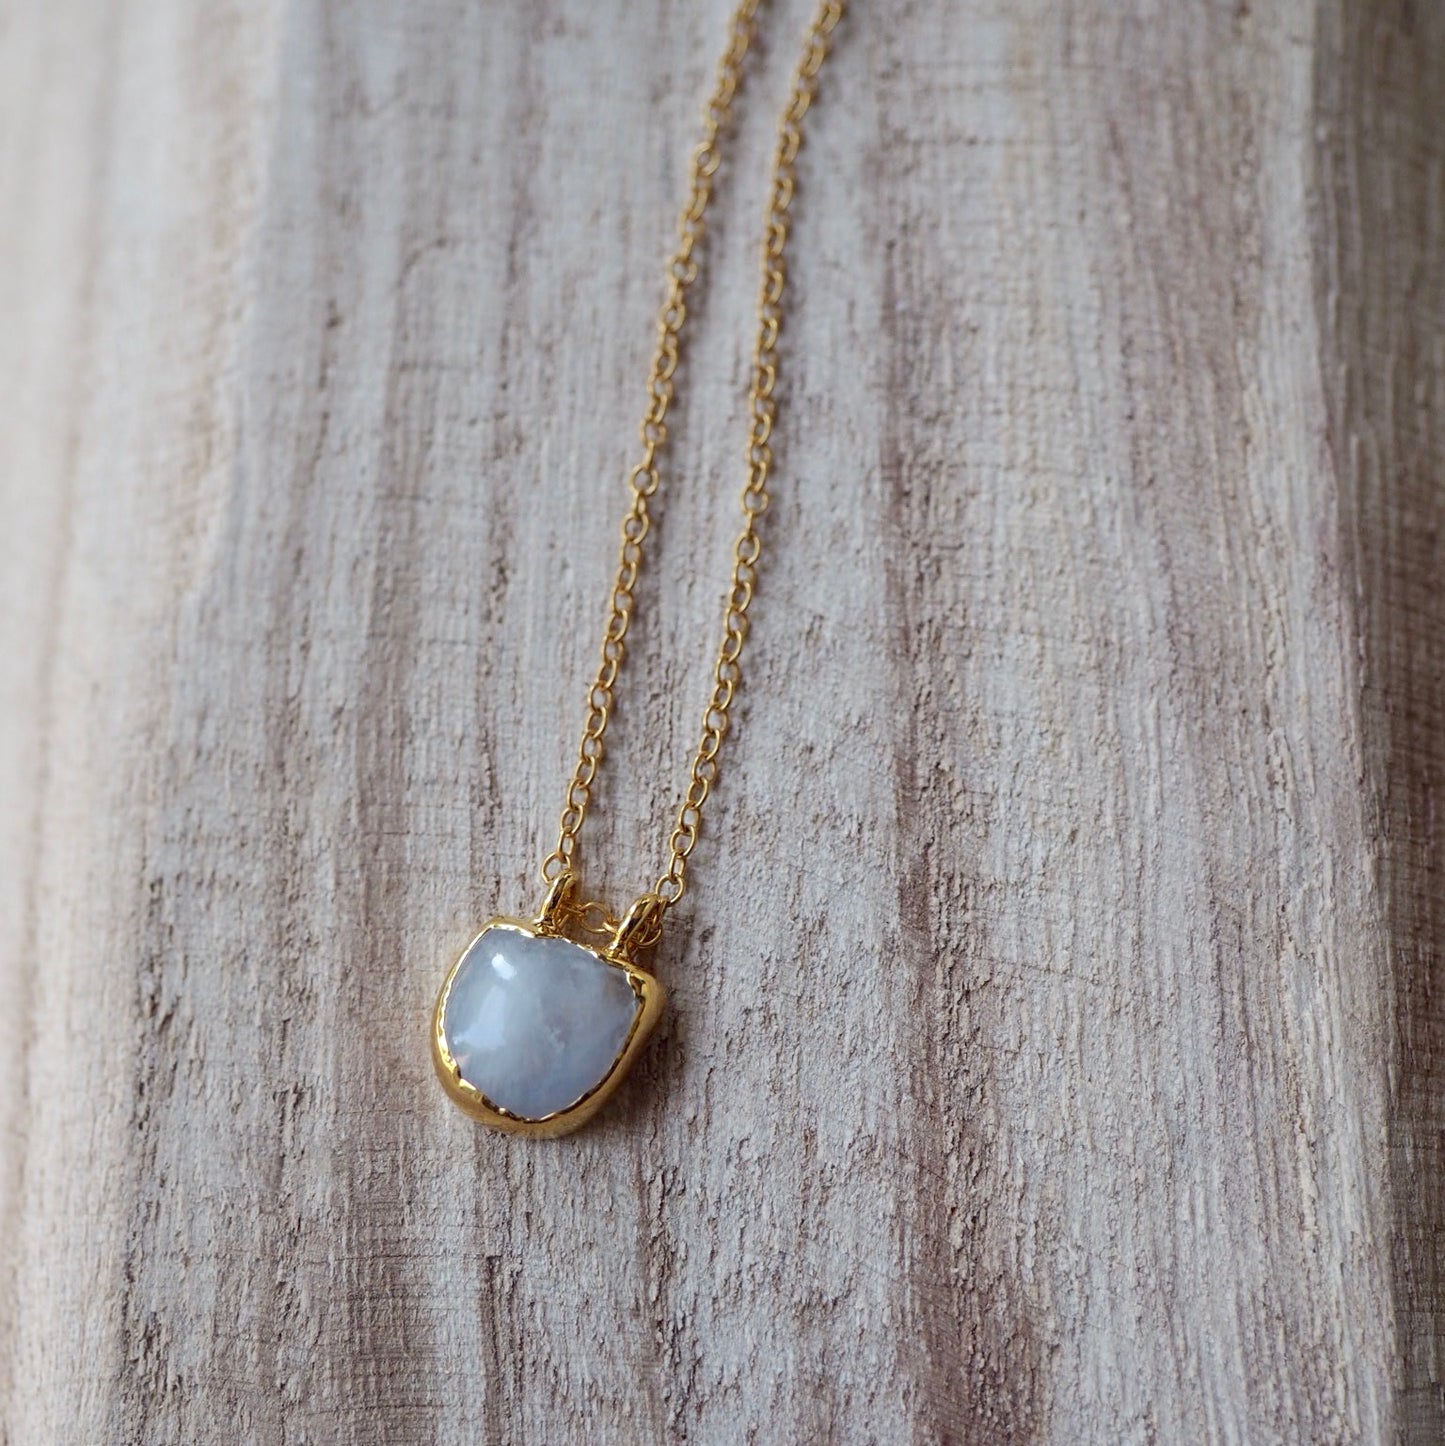 gold necklace with moonstone pendant made in Canada